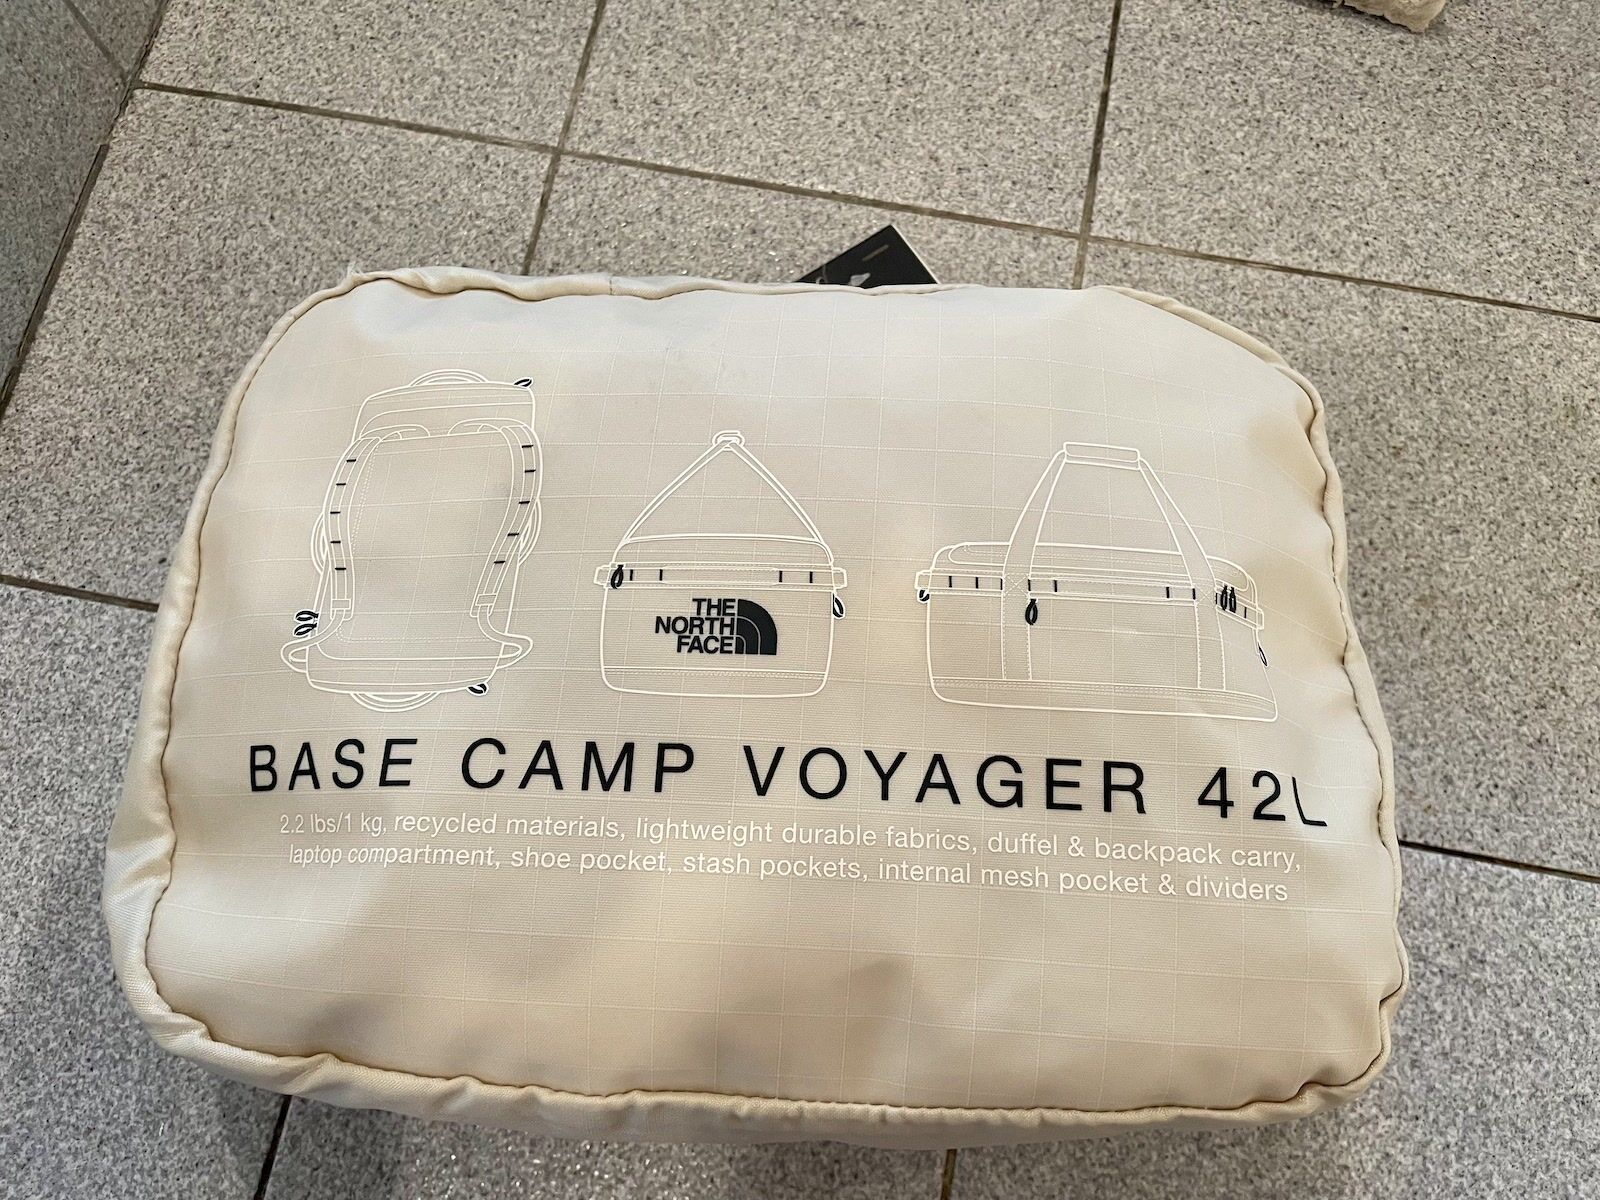 The Base Camp Voyager Duffel from The North Face, packed into the storage pocket.